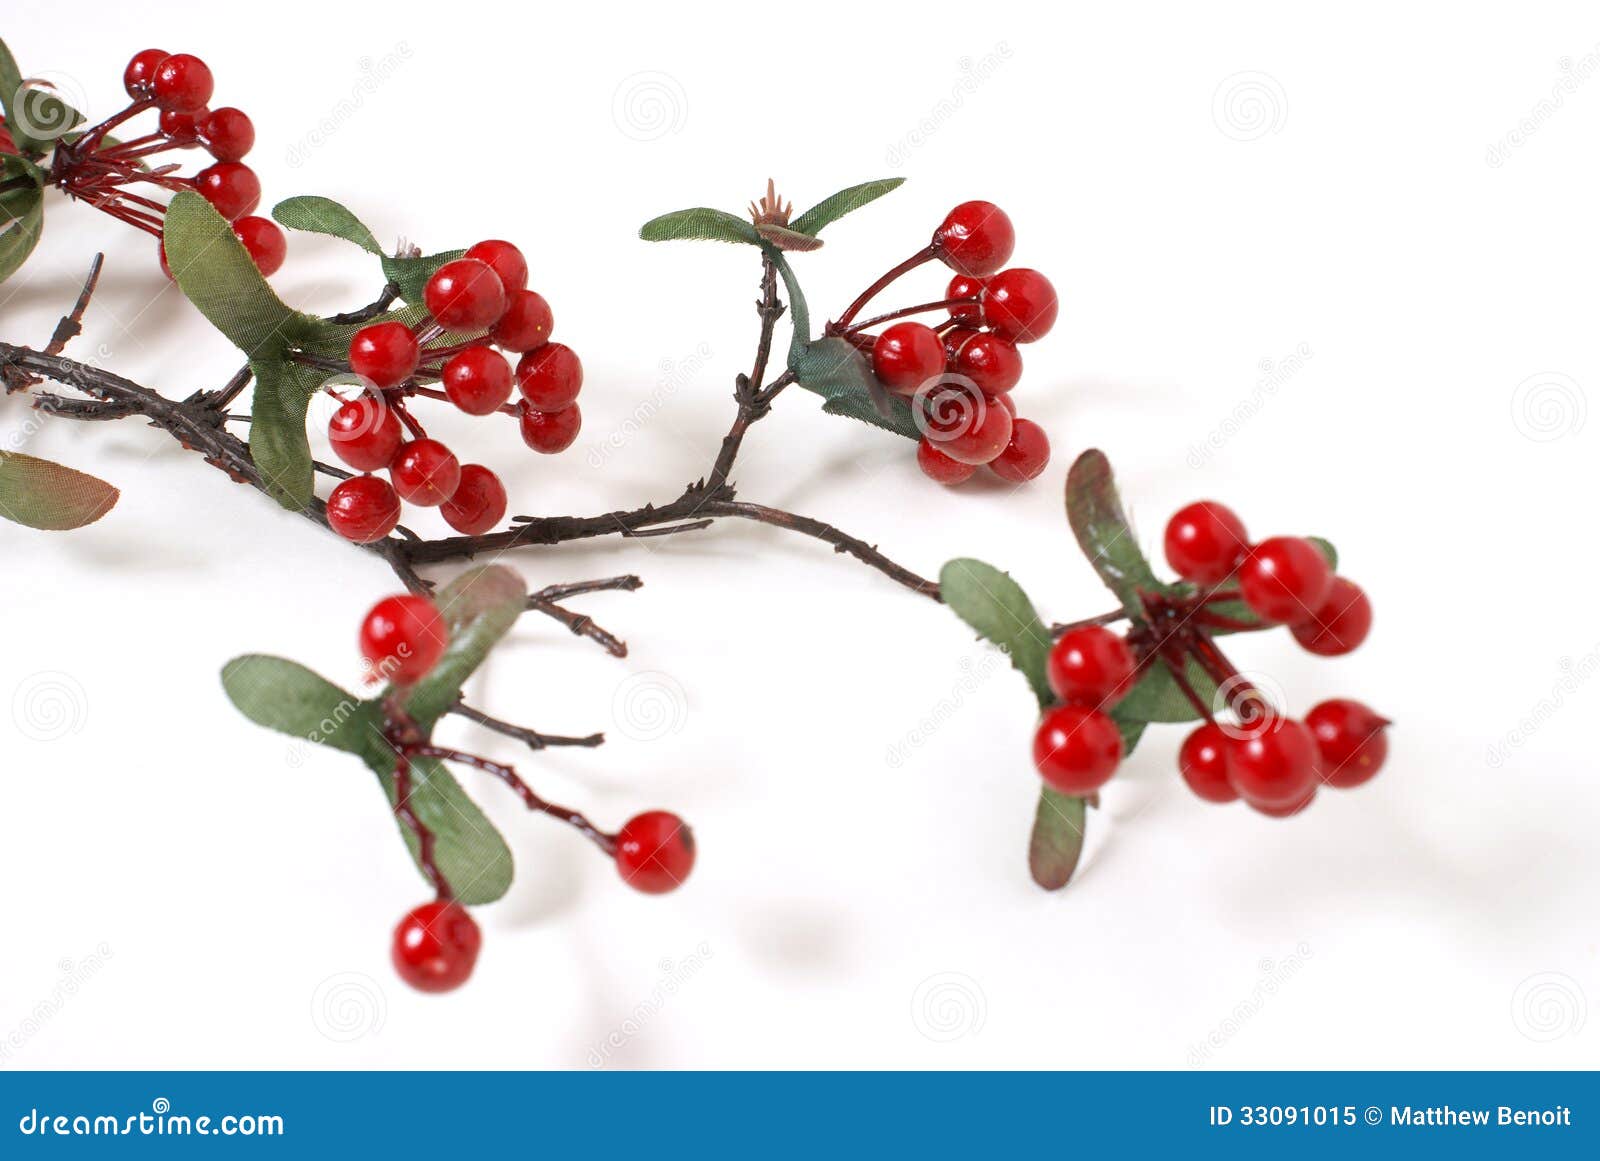 Faux Berry Branch Royalty Free Stock Photo - Image: 33091015